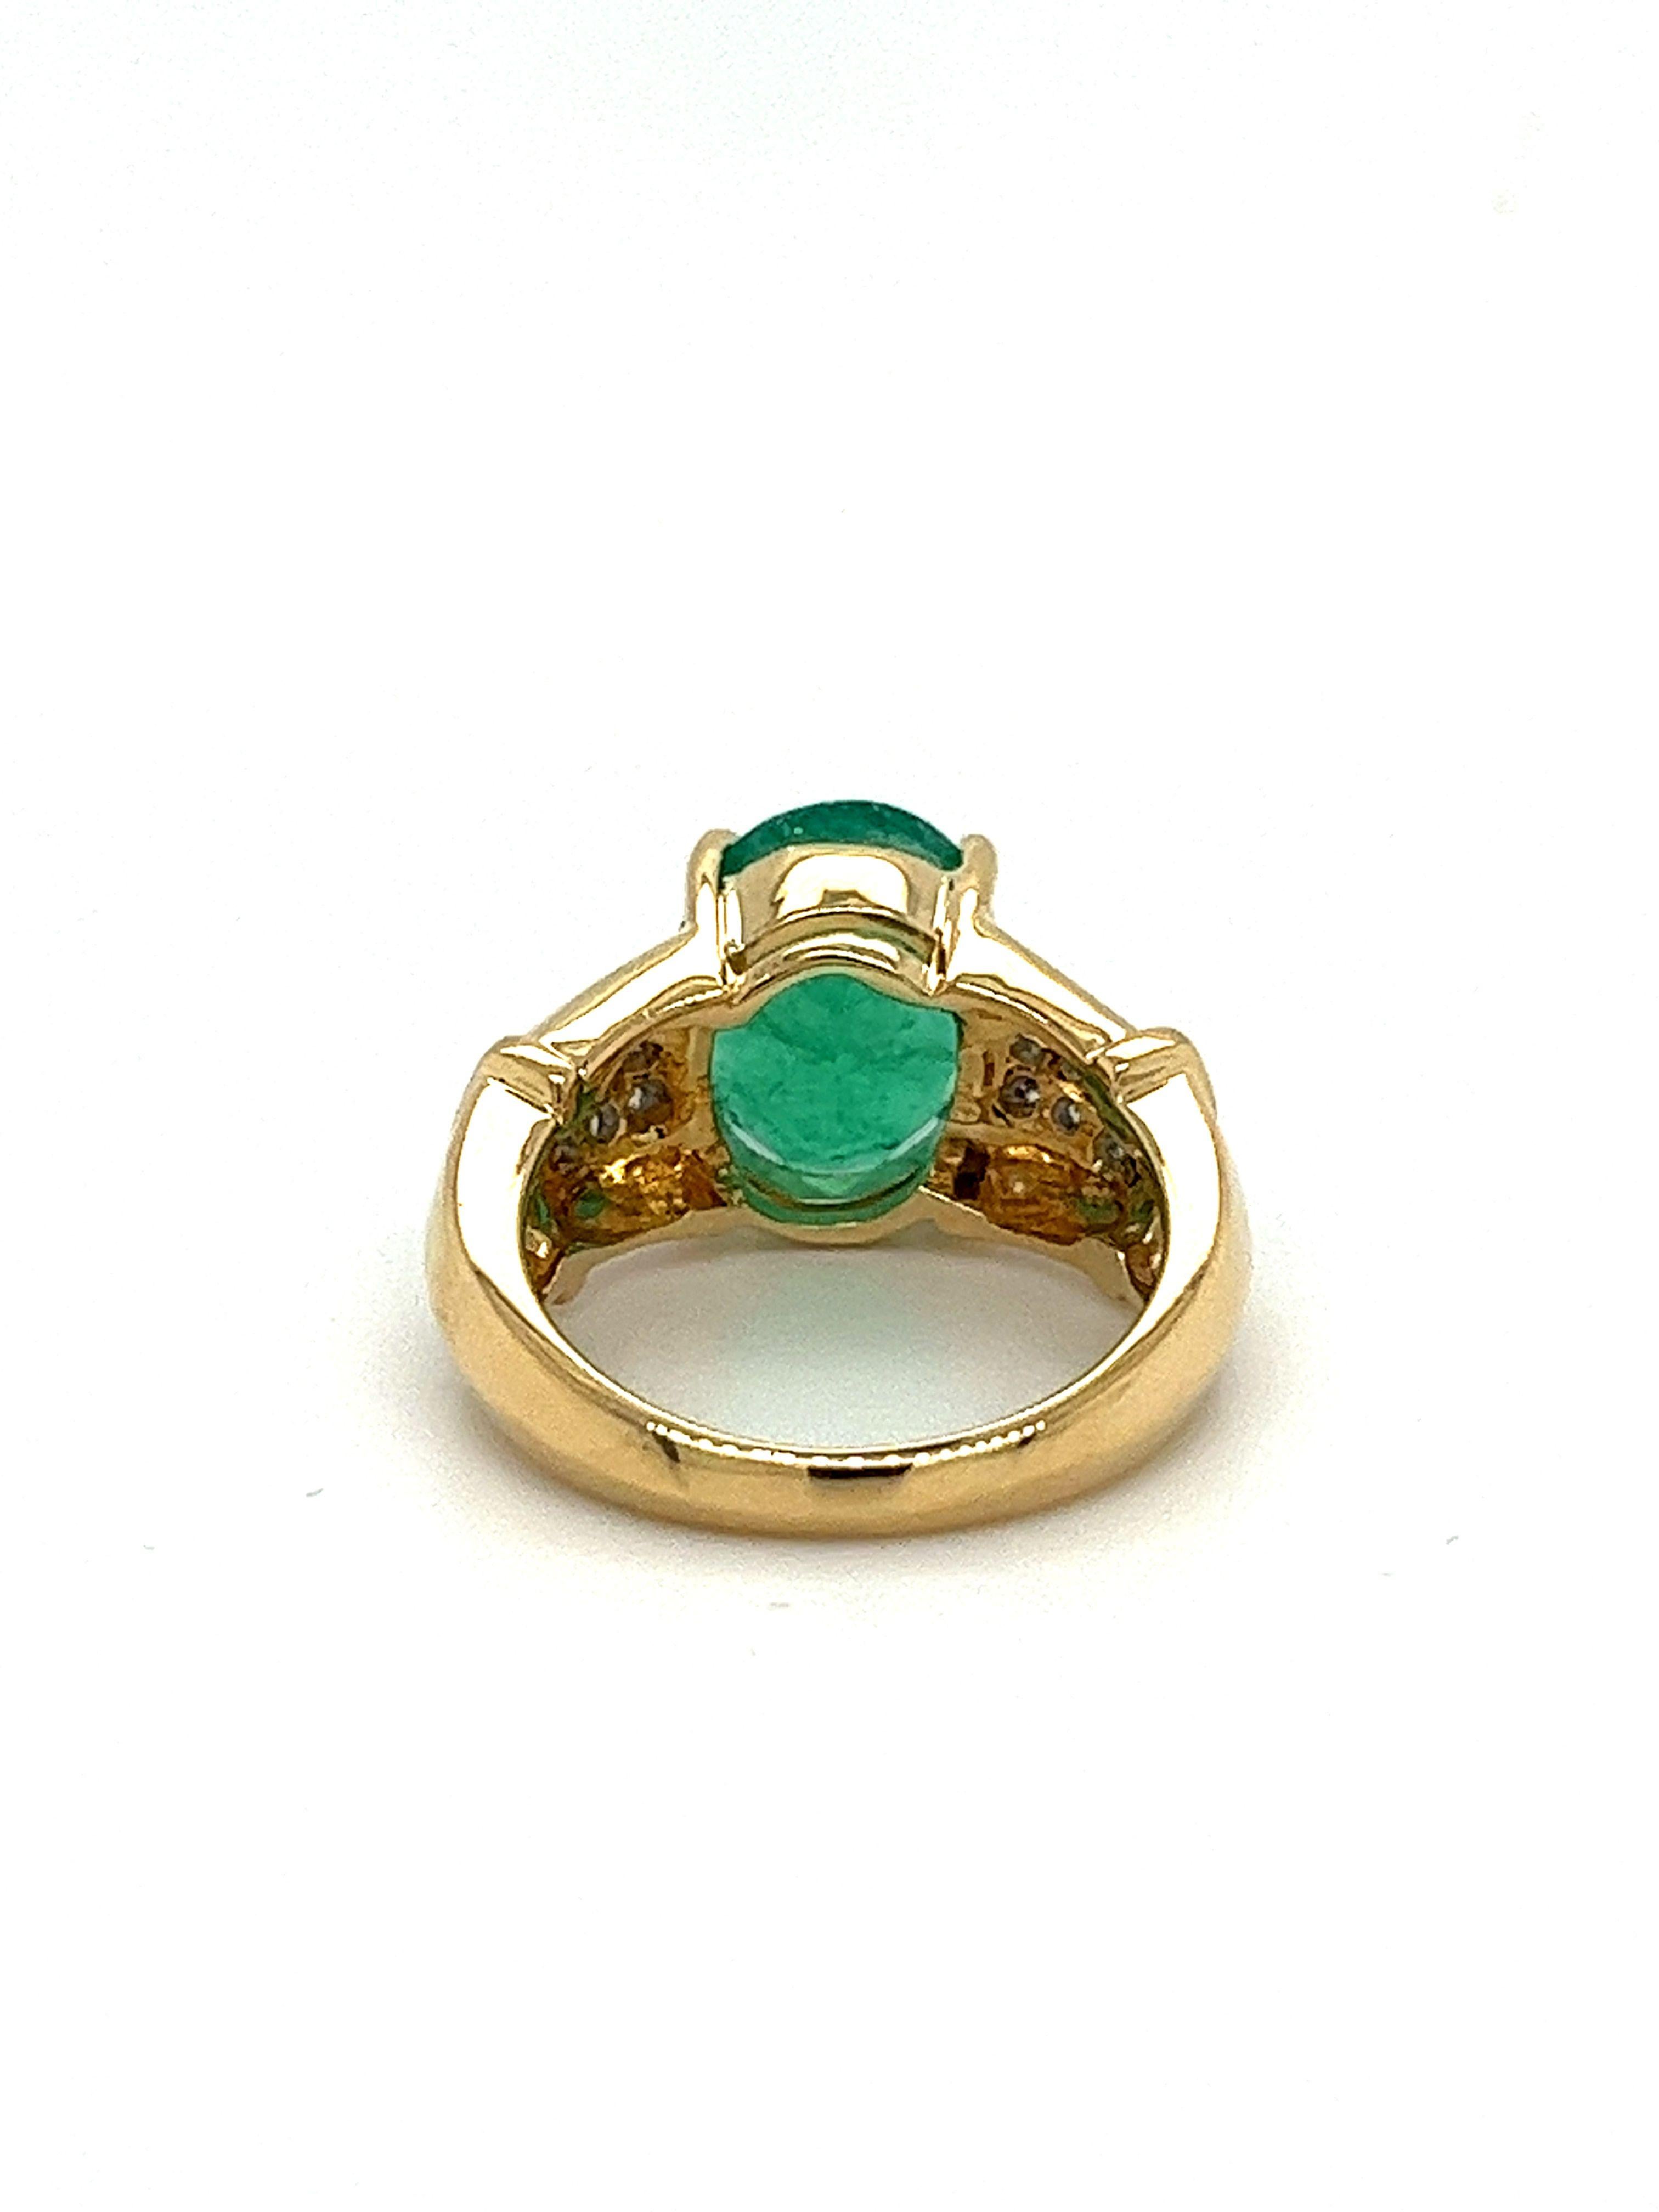 Art Deco 4.14 Carat Oval Cut Natural Emerald and Diamond Ring in 18K Yellow Gold